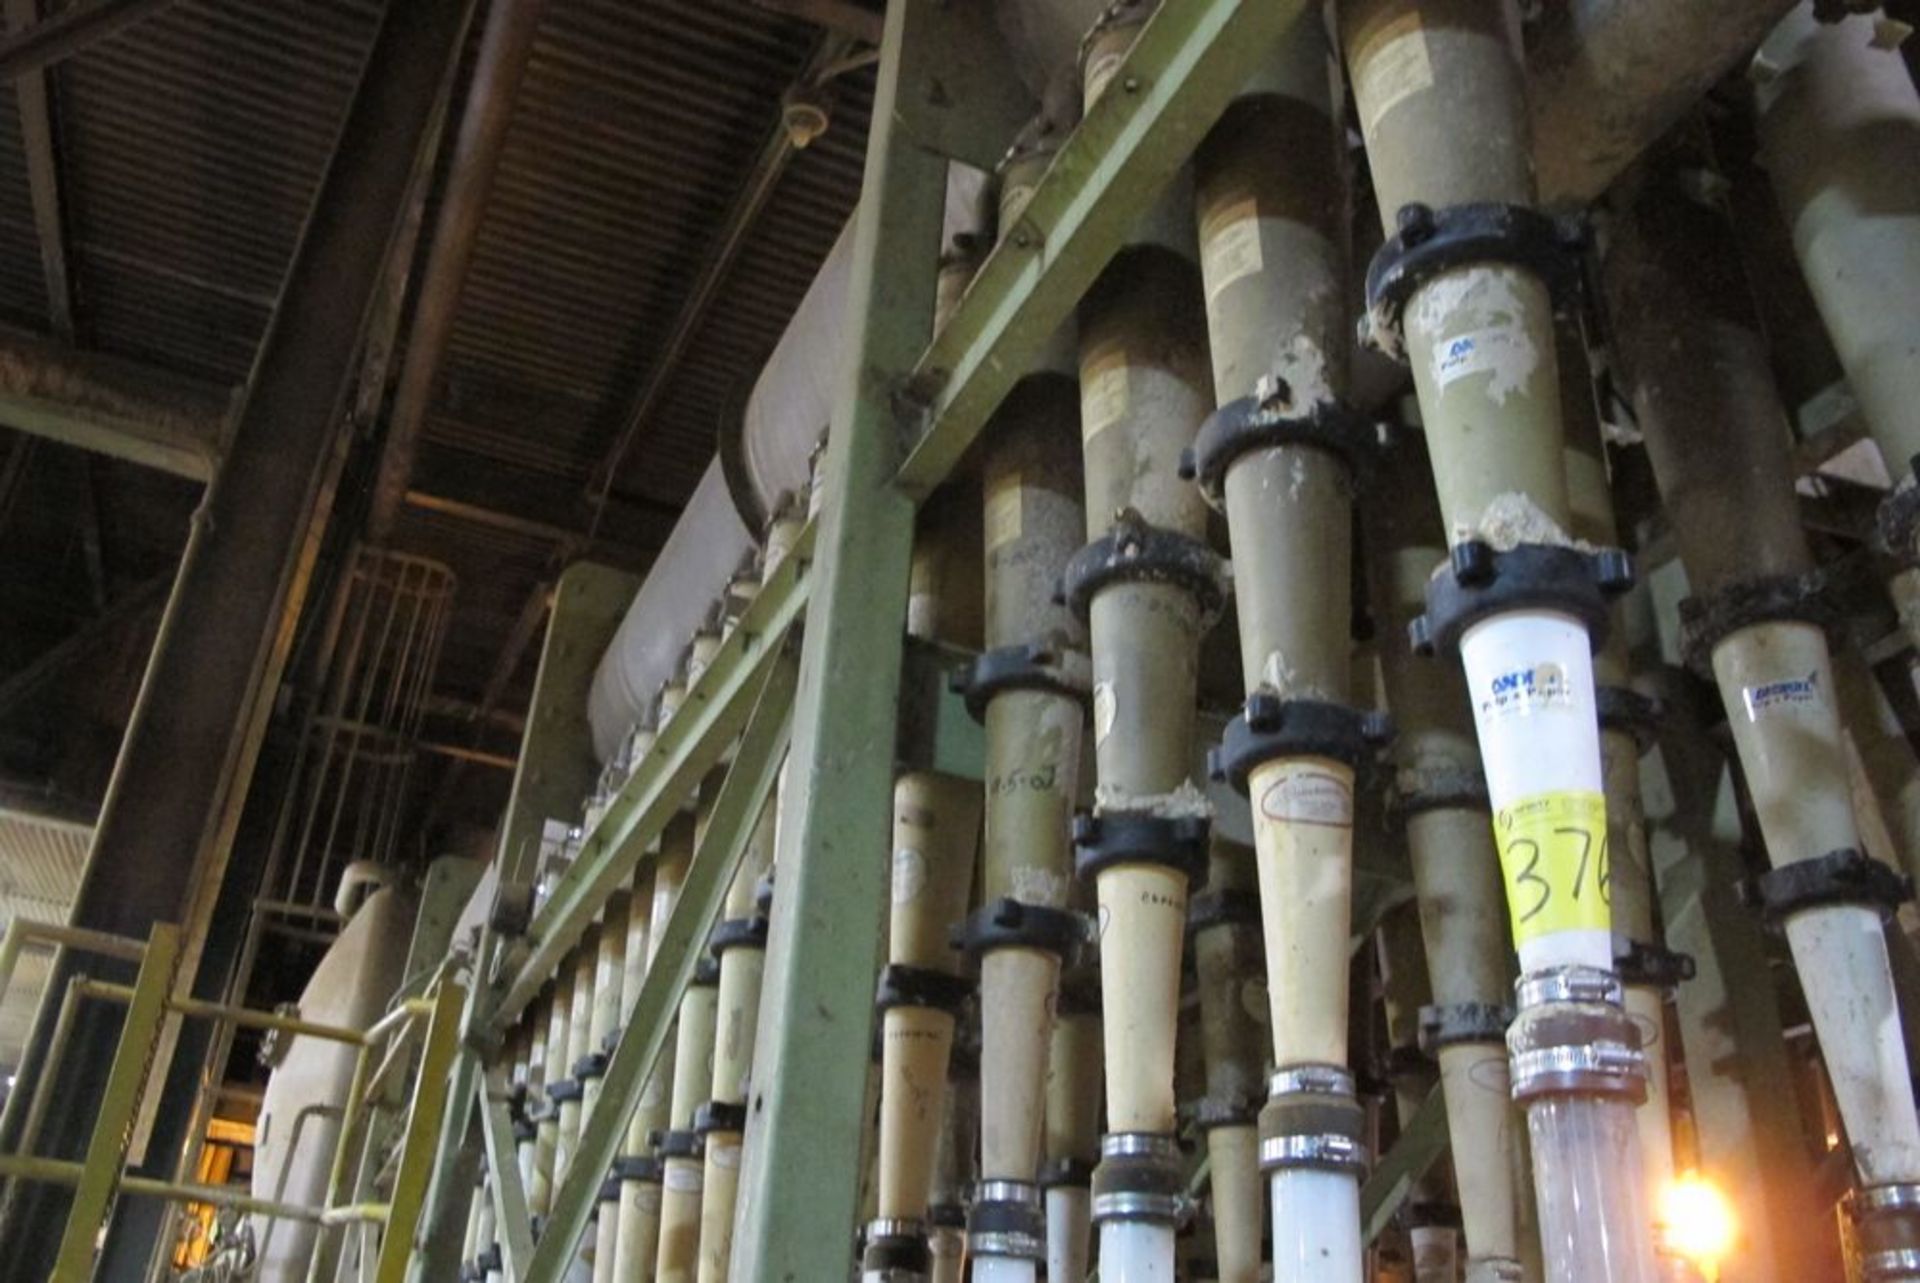 1 ROW OF ANDRITZ CENTRI-CLEANER LIQUID CYCLONE METAL CYLINDER BOTTLES, APPROX 20 IN ROW (BLDG 46